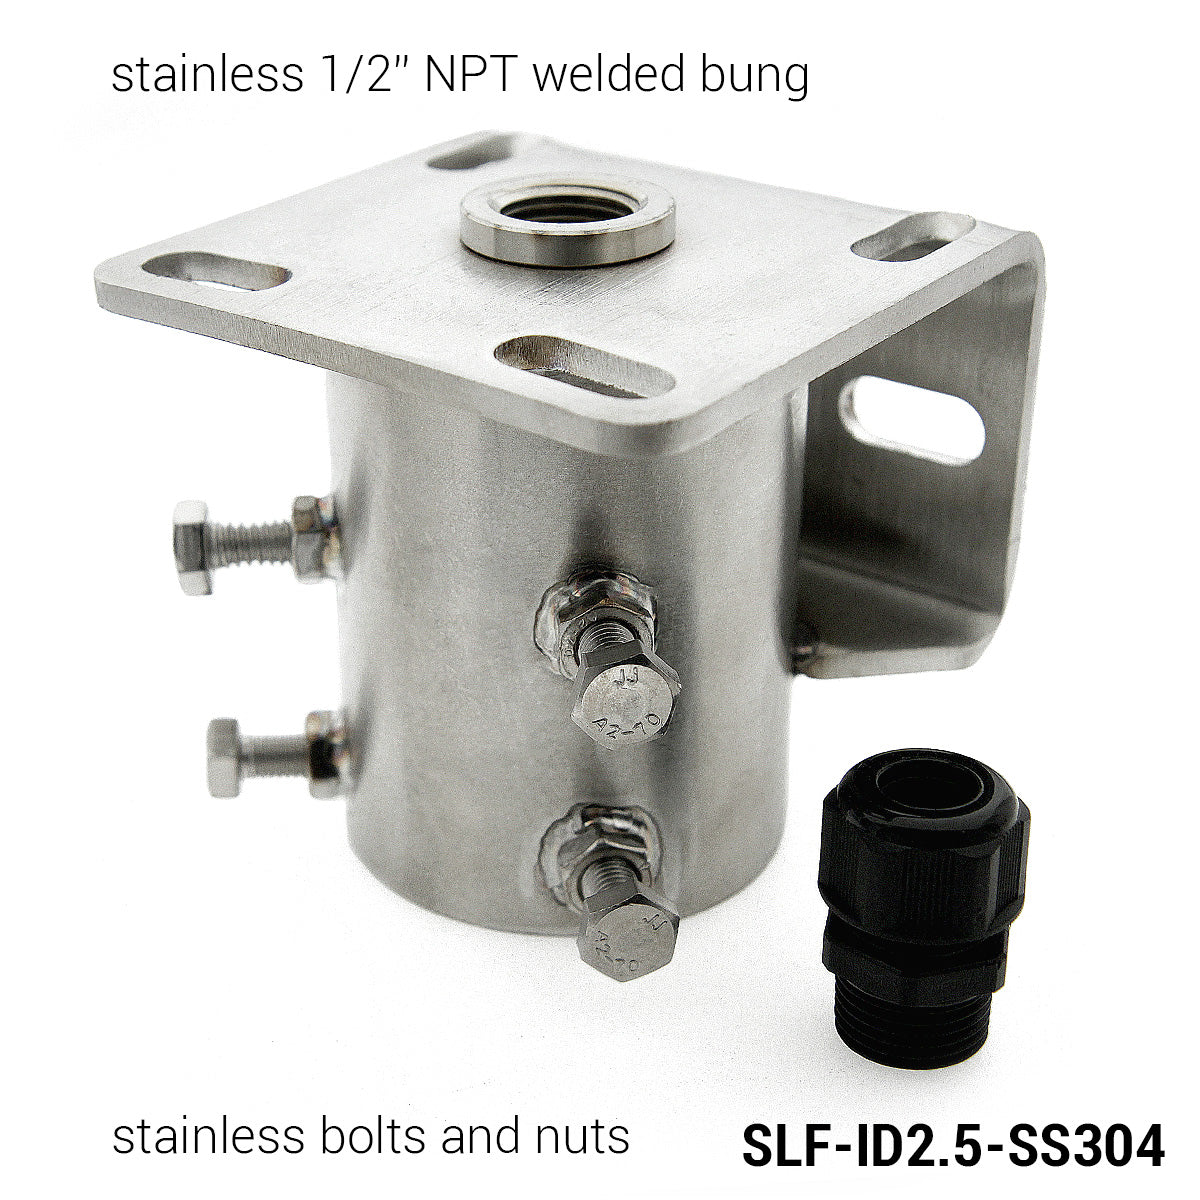 Stainless Steel Slipfitter Adaptor Mounting Bracket (ID 2.5") for Round Pole (up to OD 2 3/8")